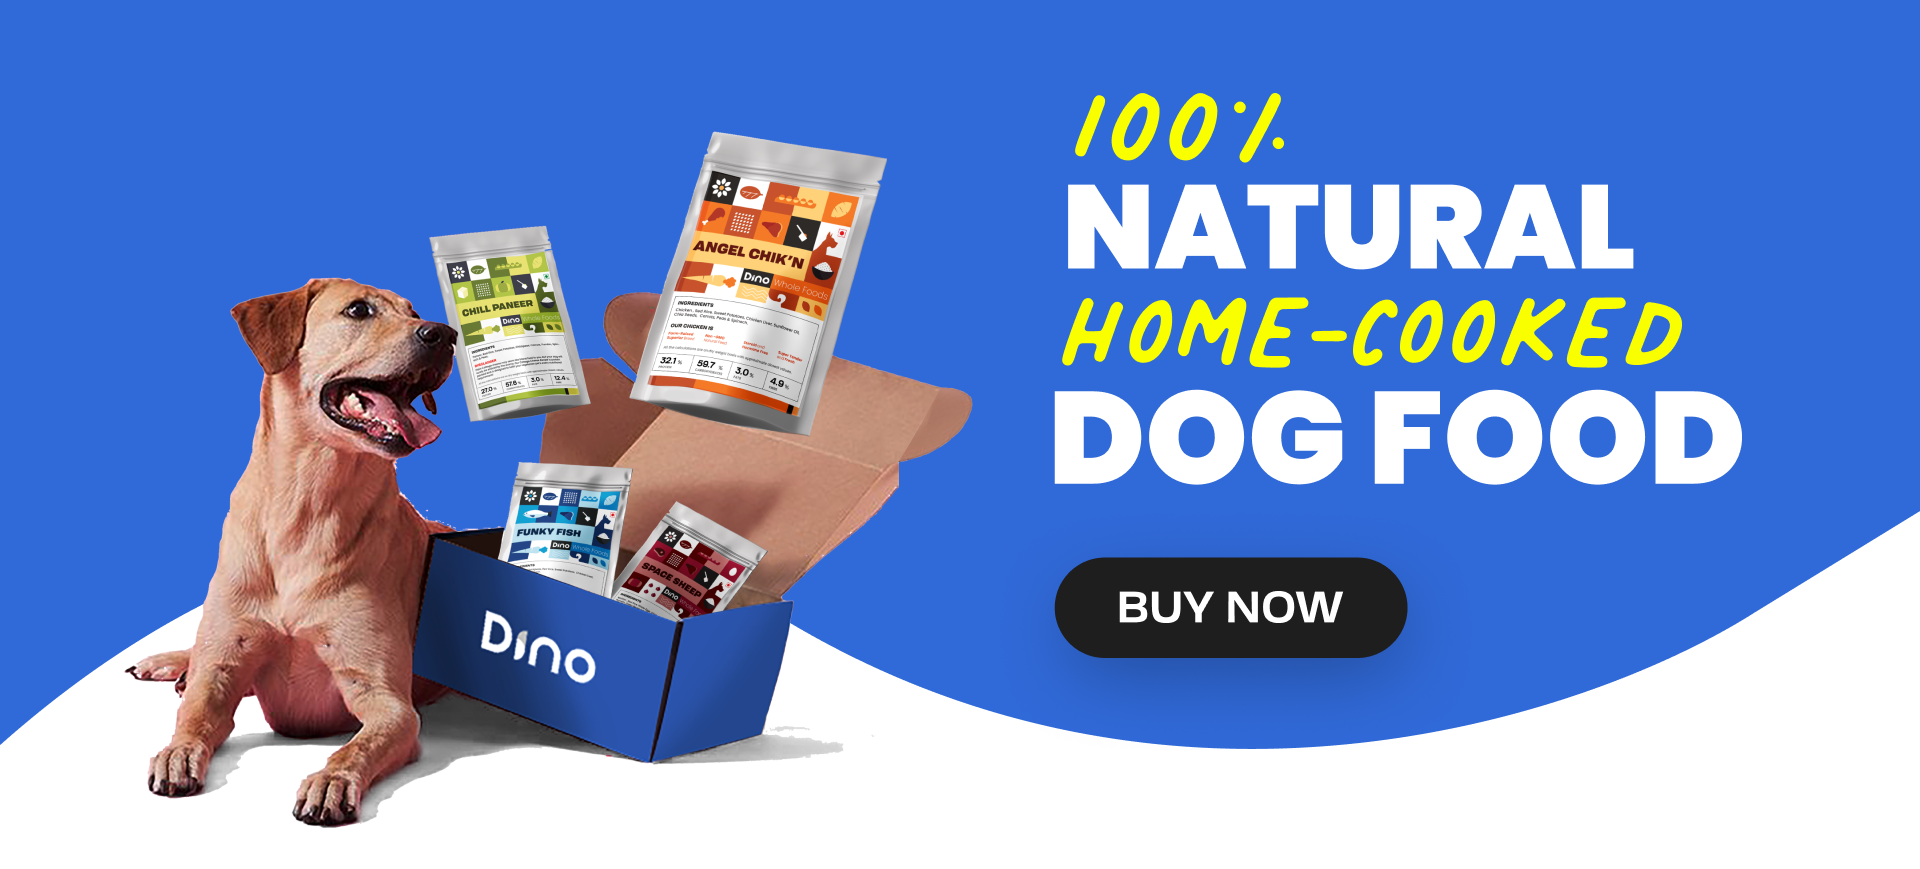 100% Natural Home-Cooked Dog Food